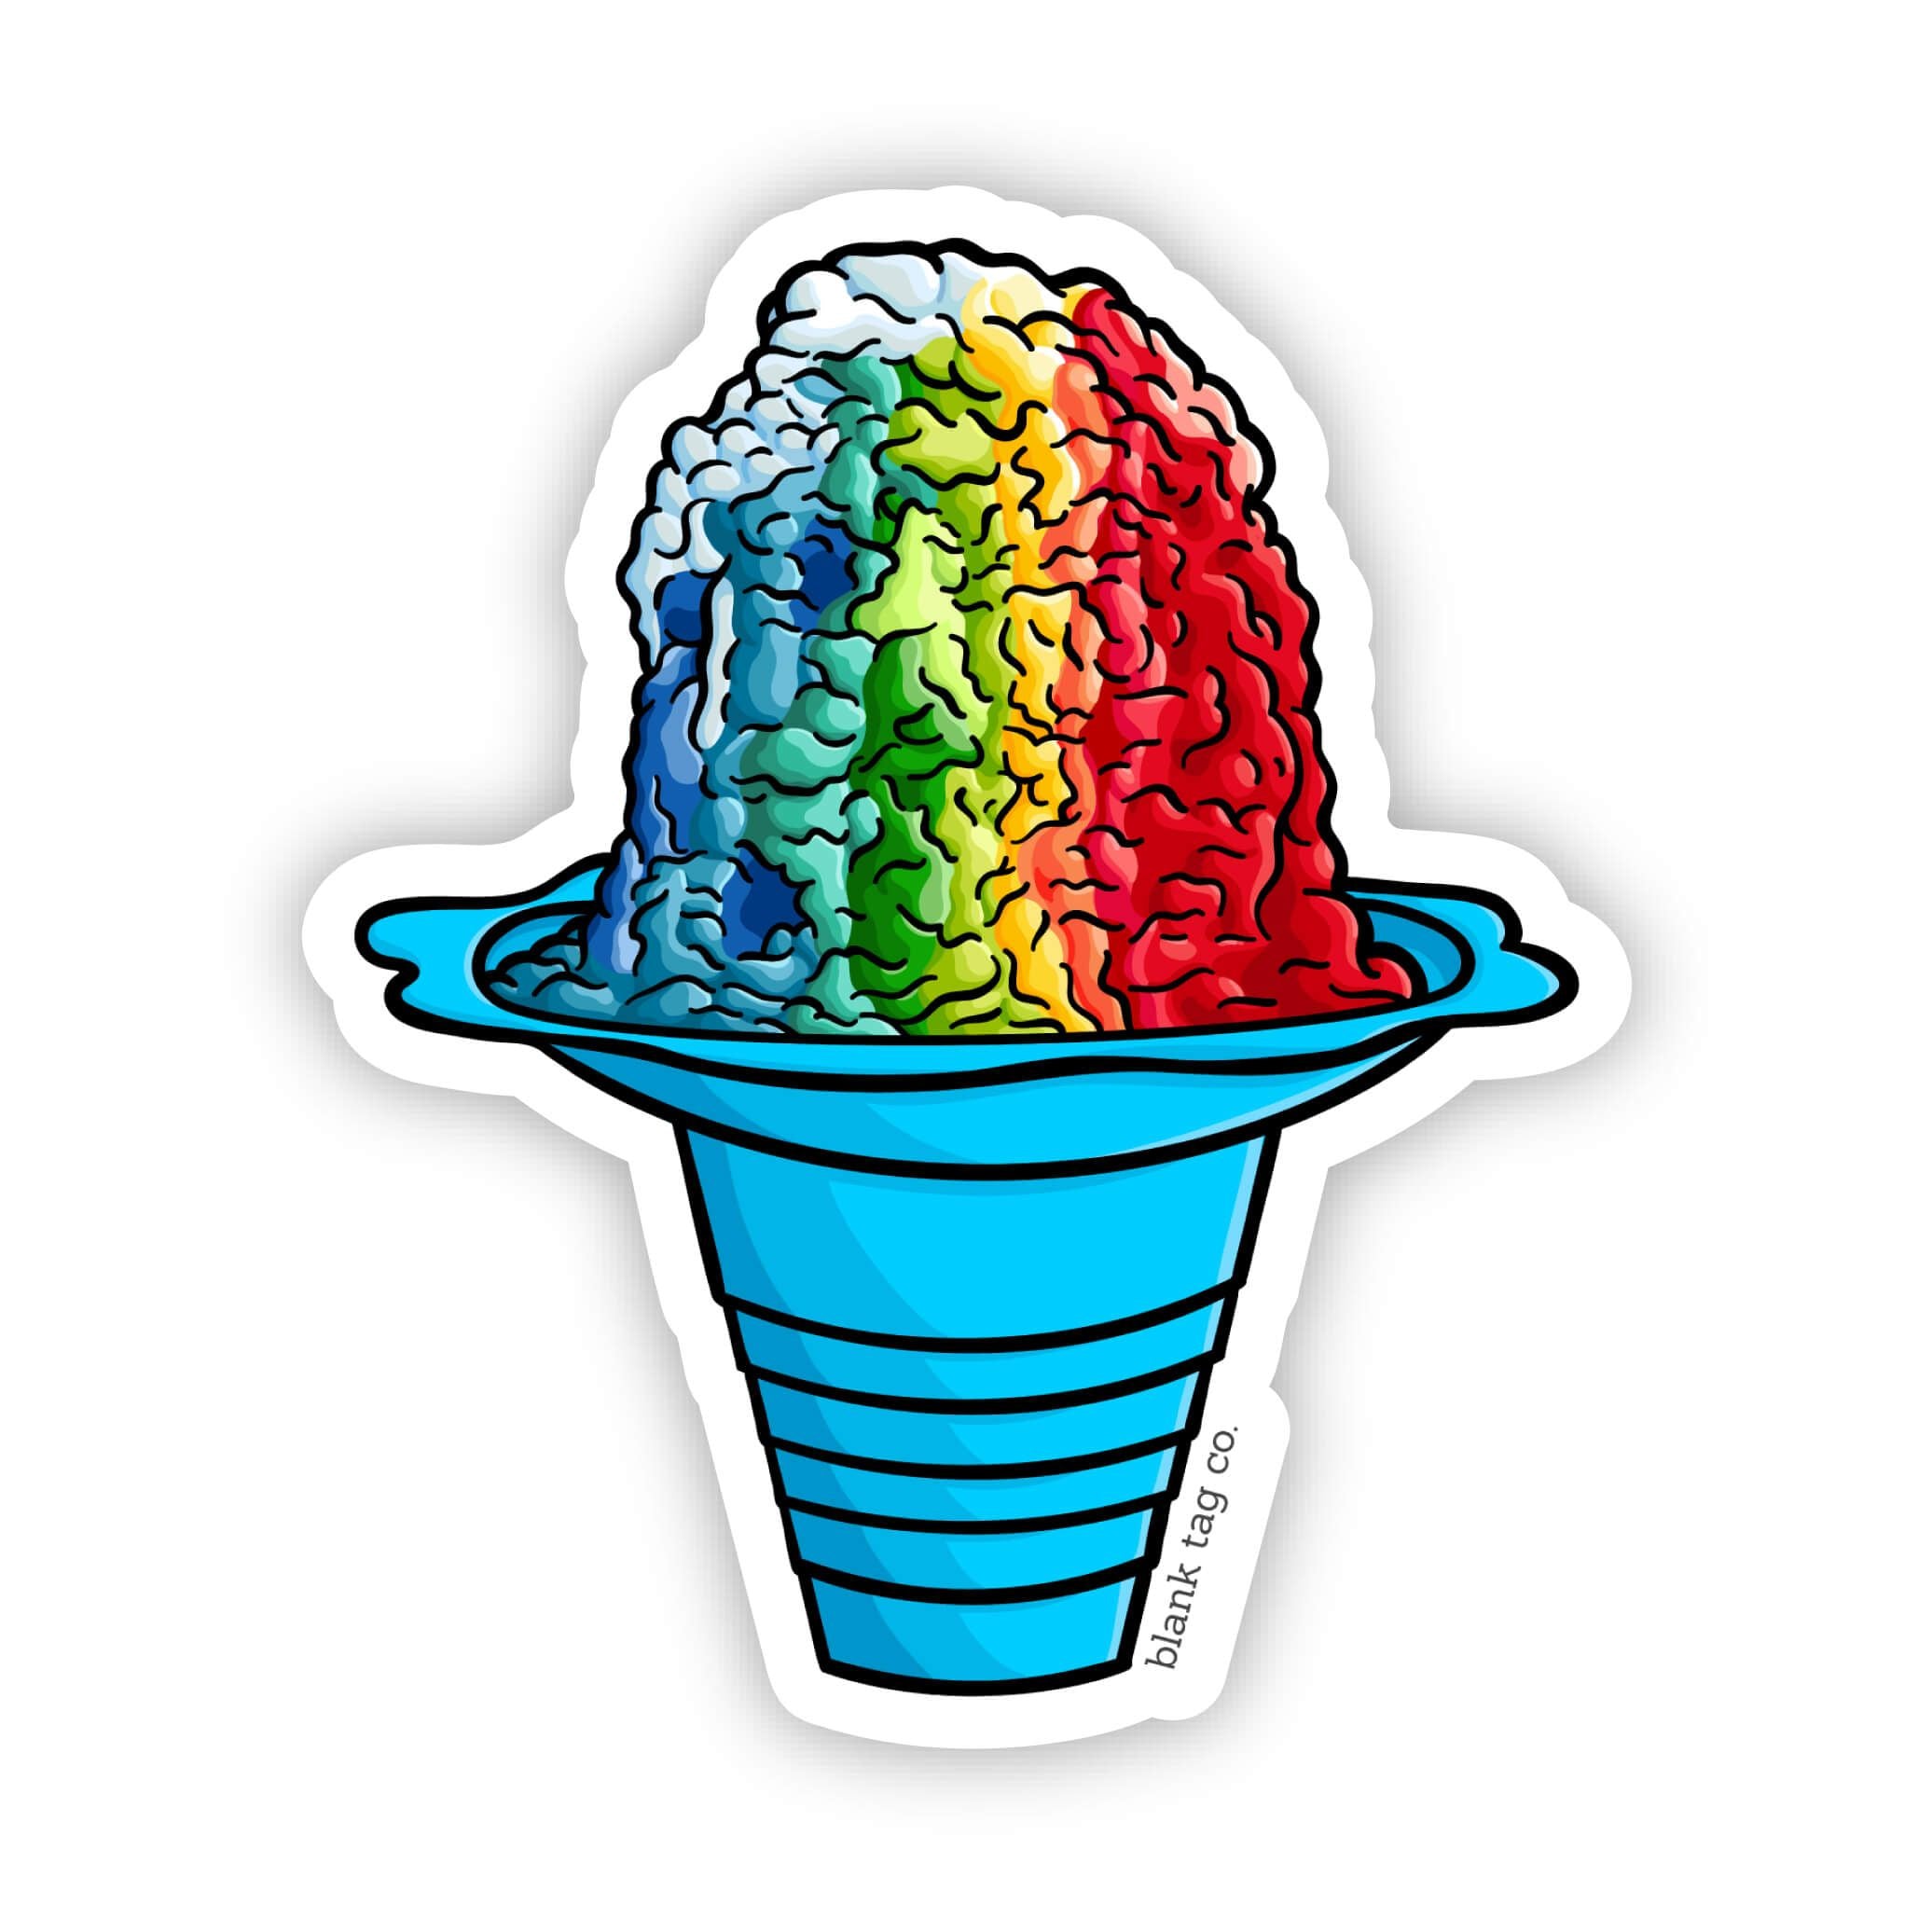 The Shave Ice Sticker